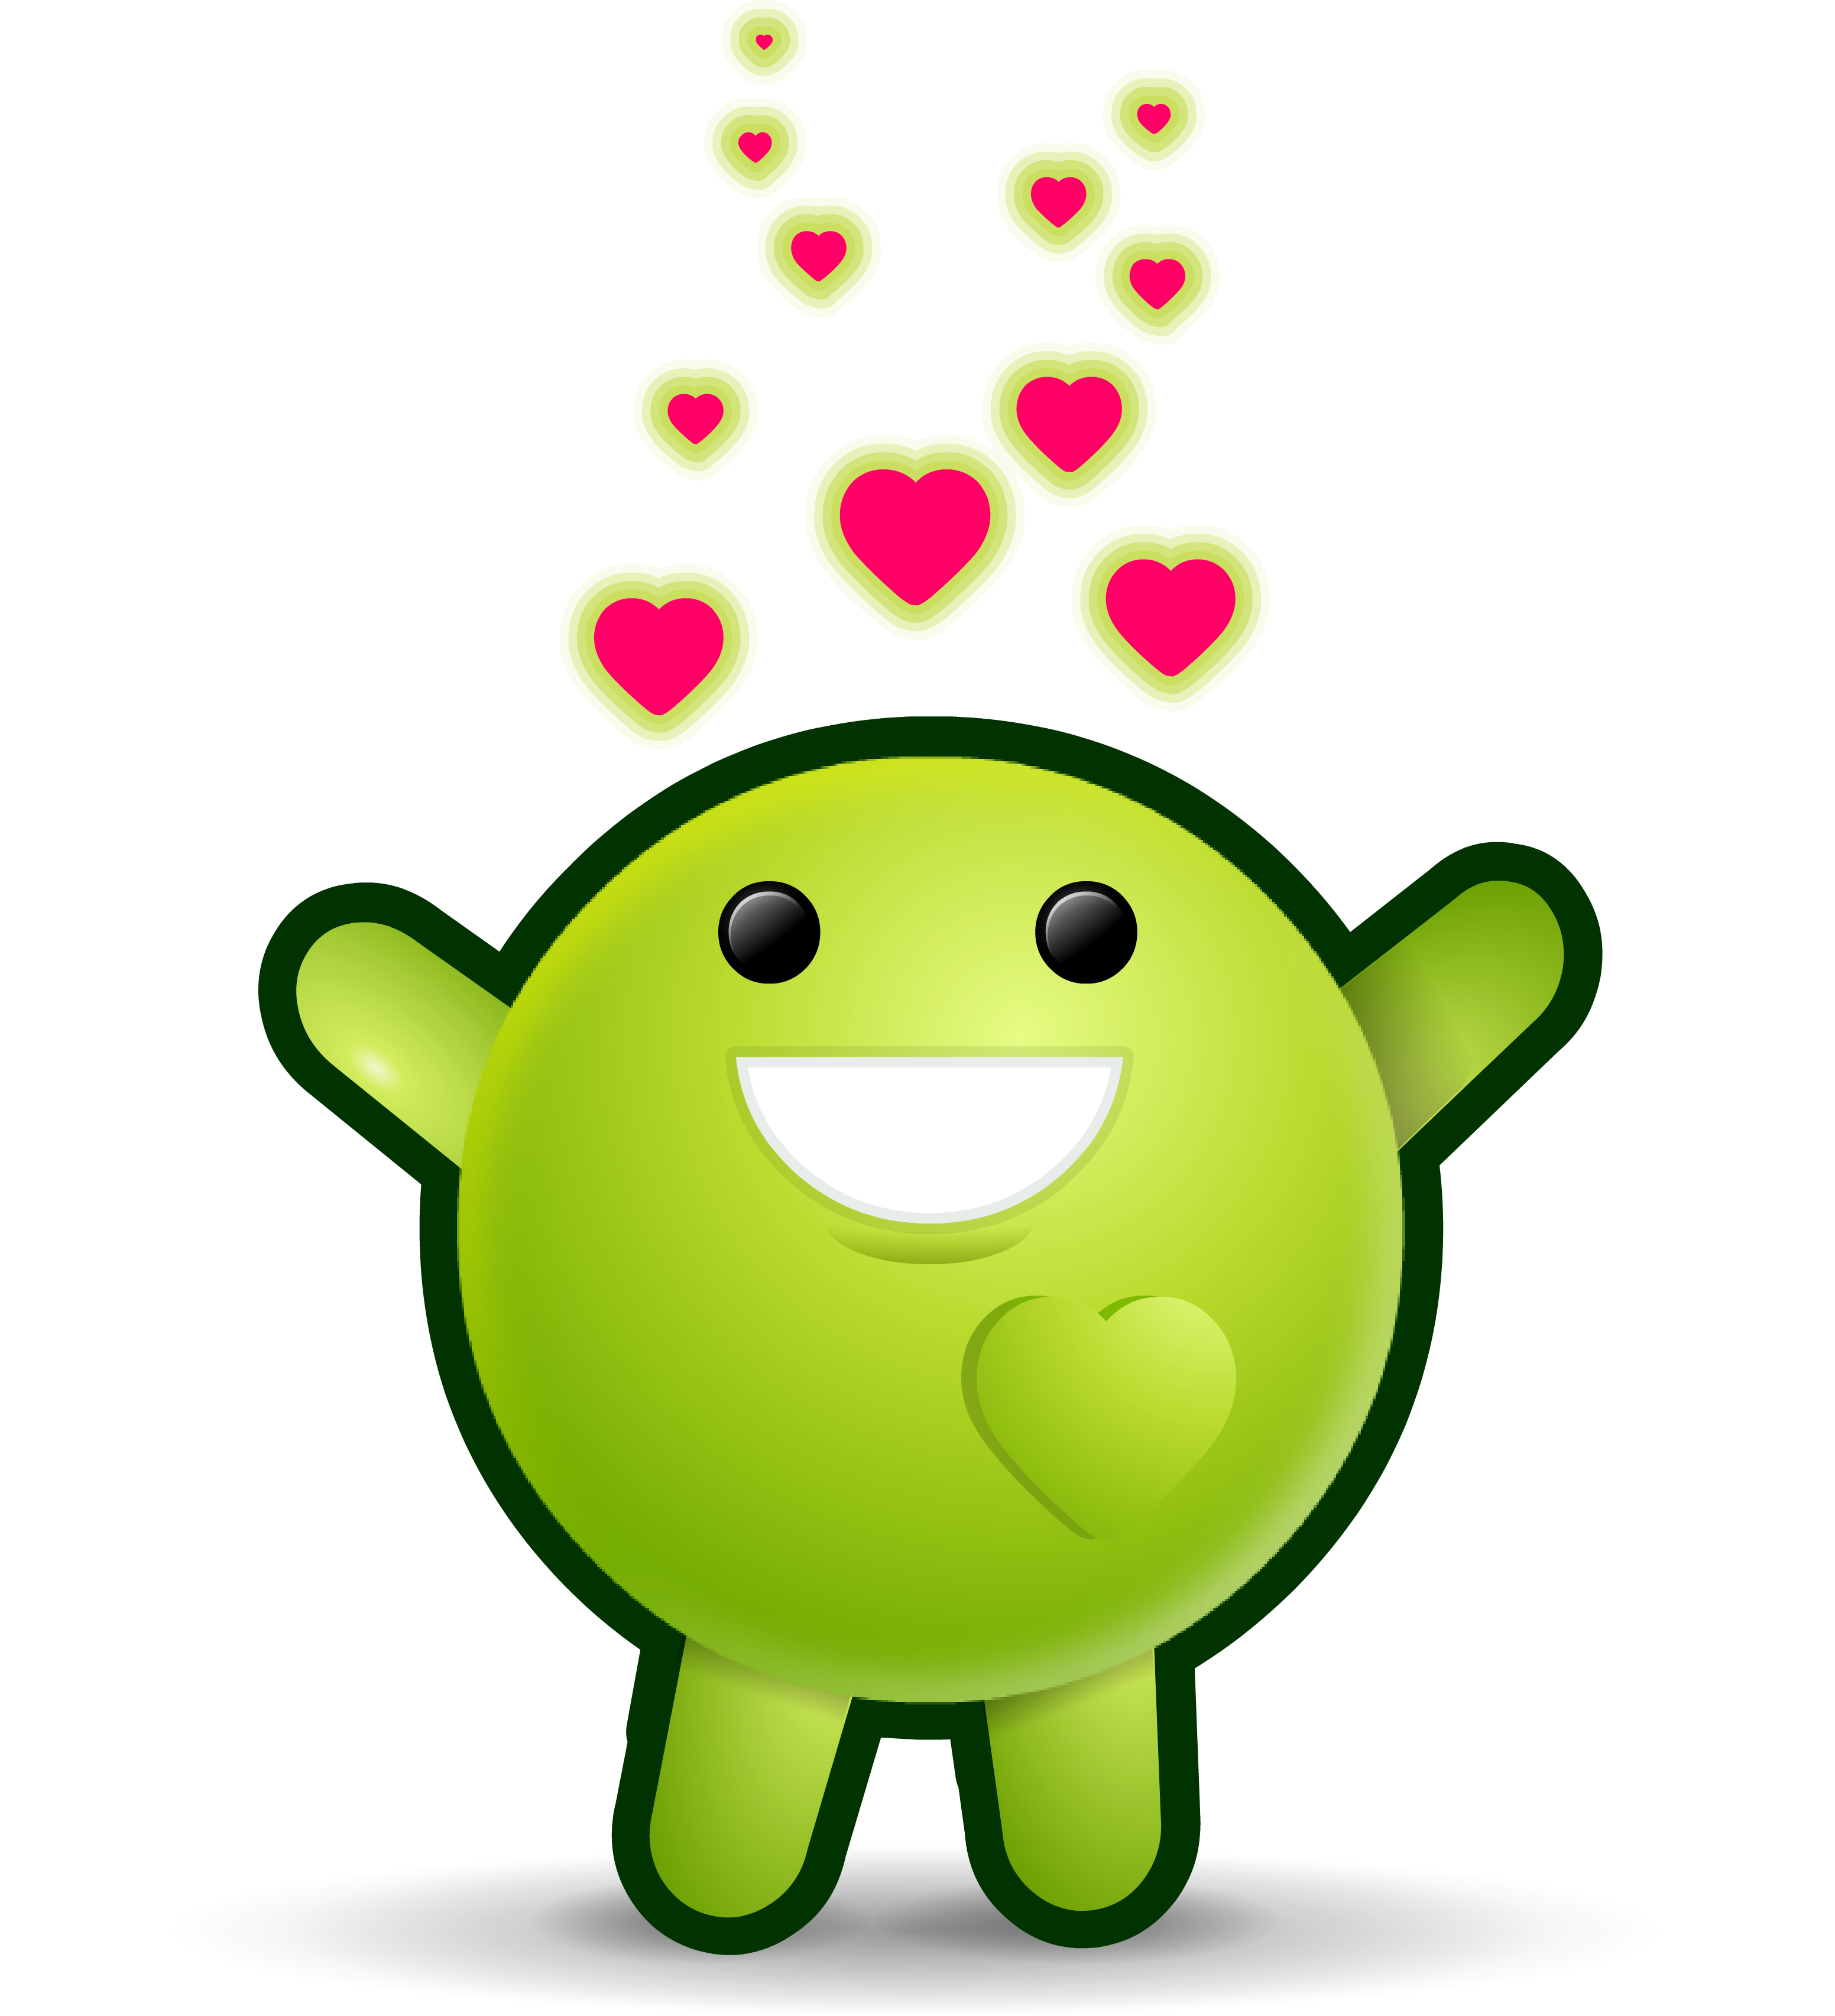 Peas clipart smiley. Pea green physio 